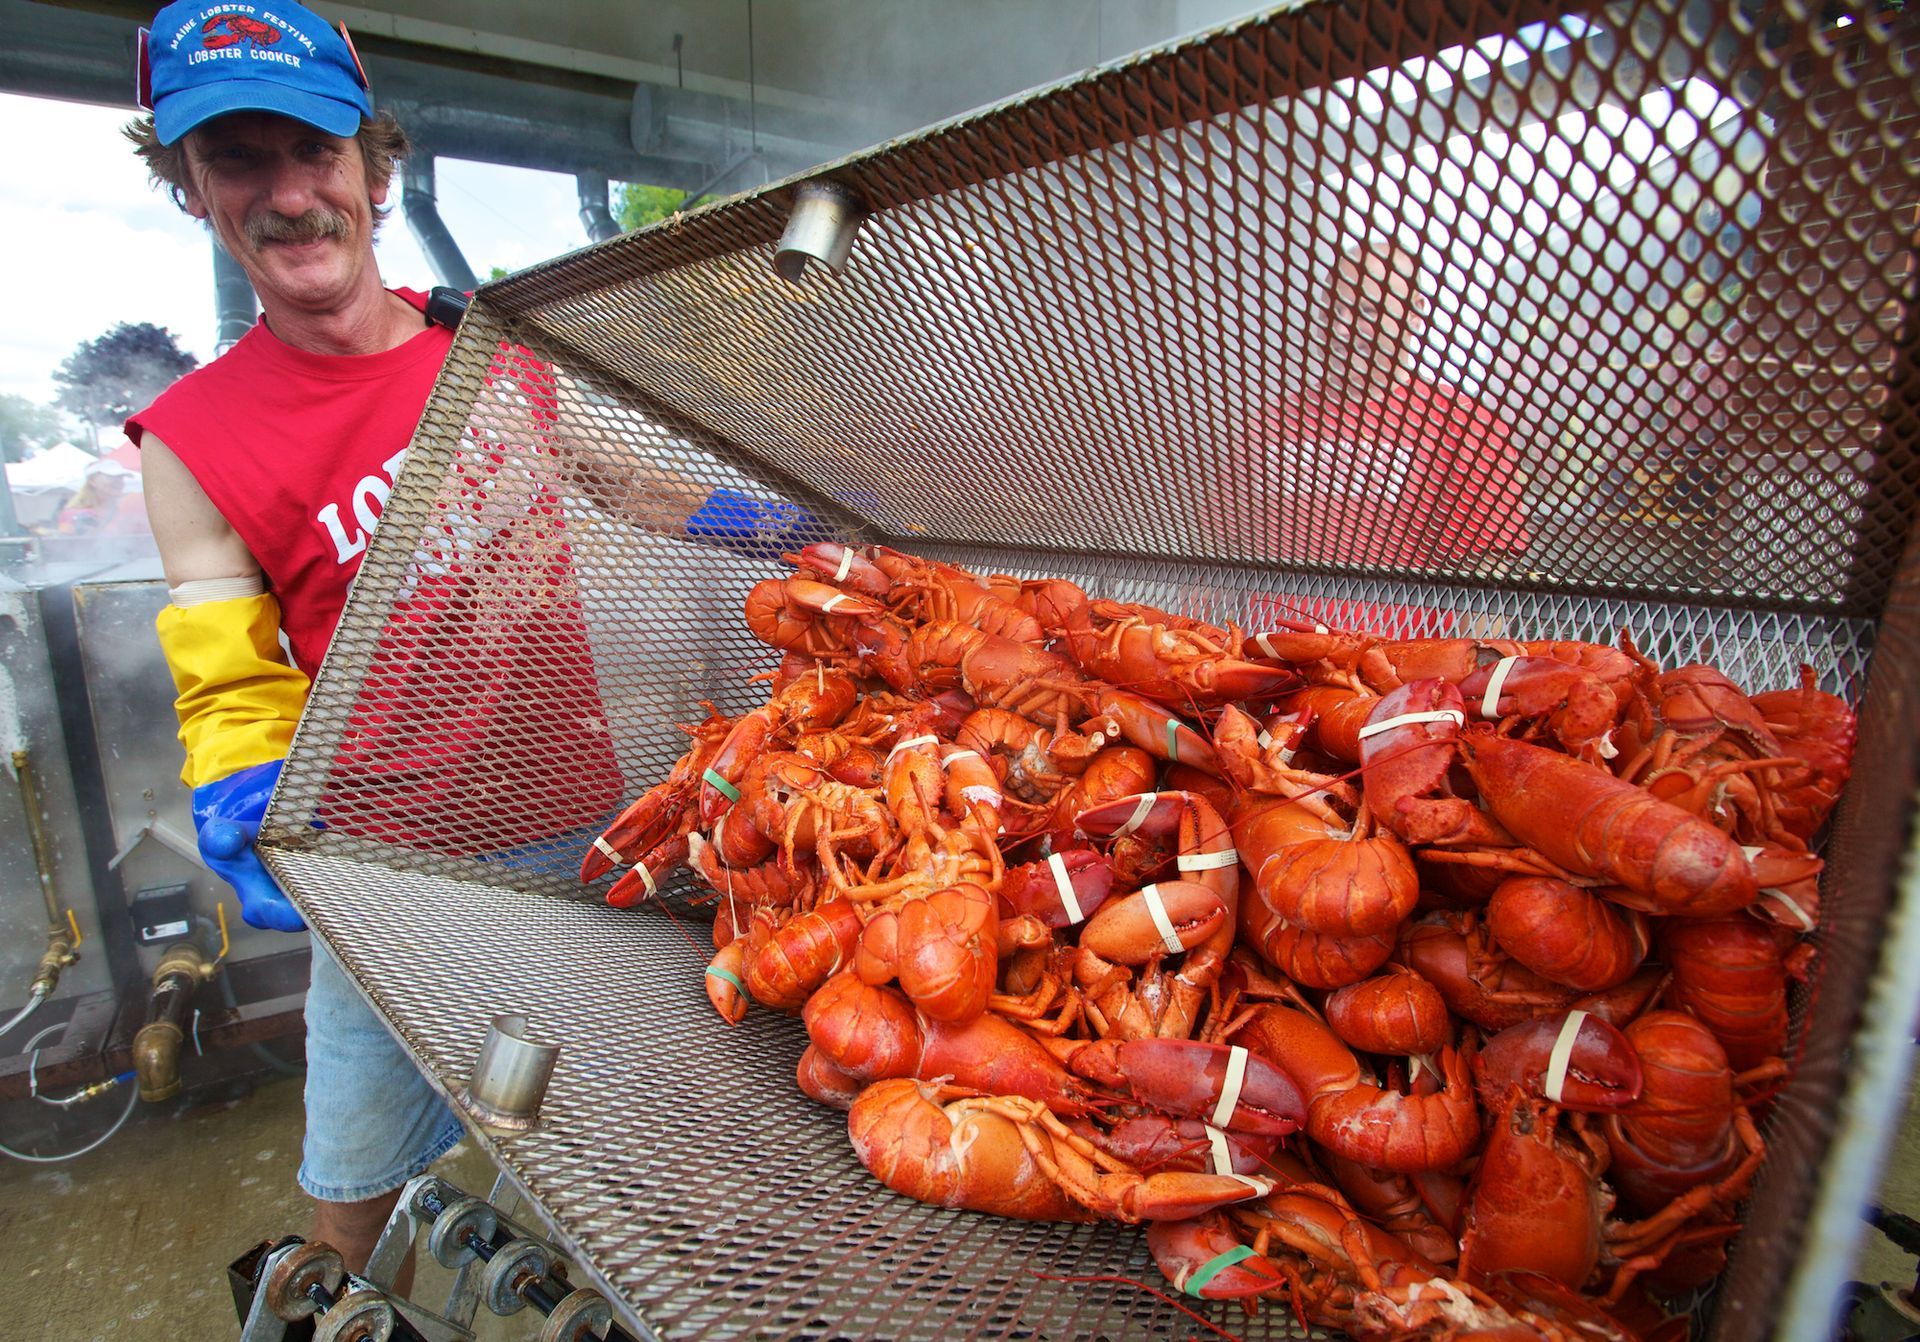 World's Largest Lobster Cooker, world record in Rockland, Maine
